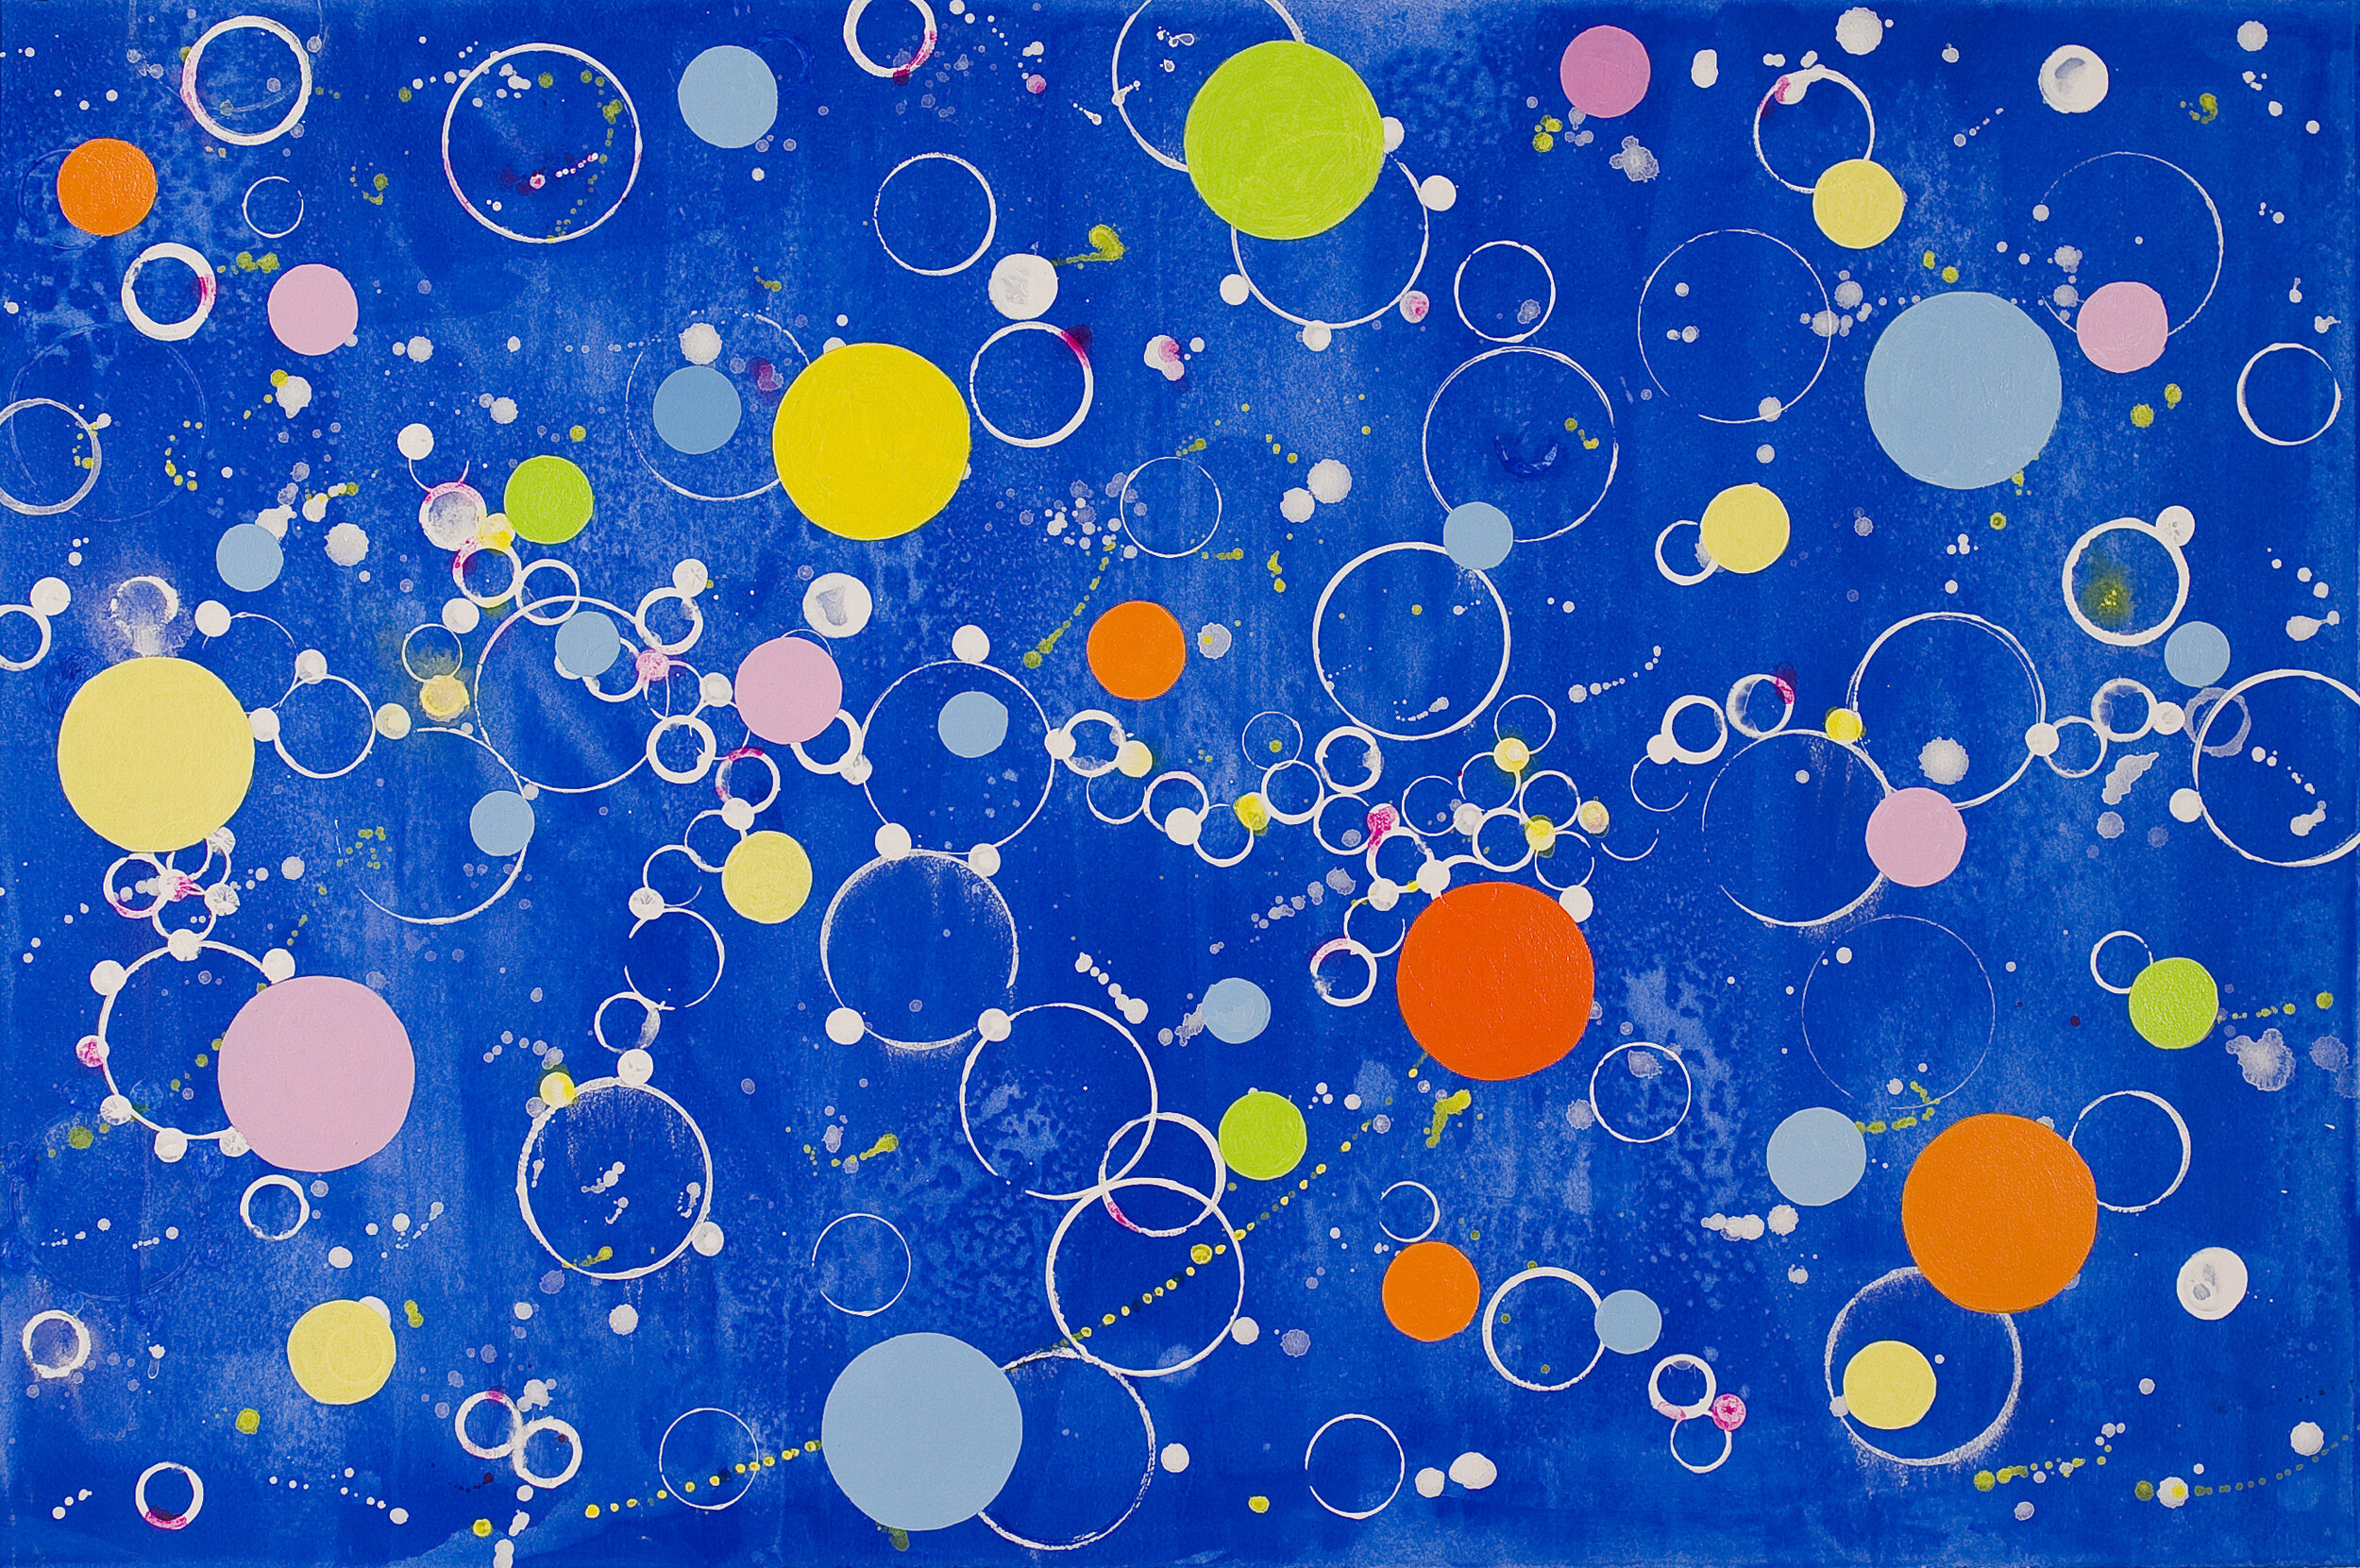  Study for  A Fragment of the Universe , 2009, acrylic on rag paper, 24” x 36” 